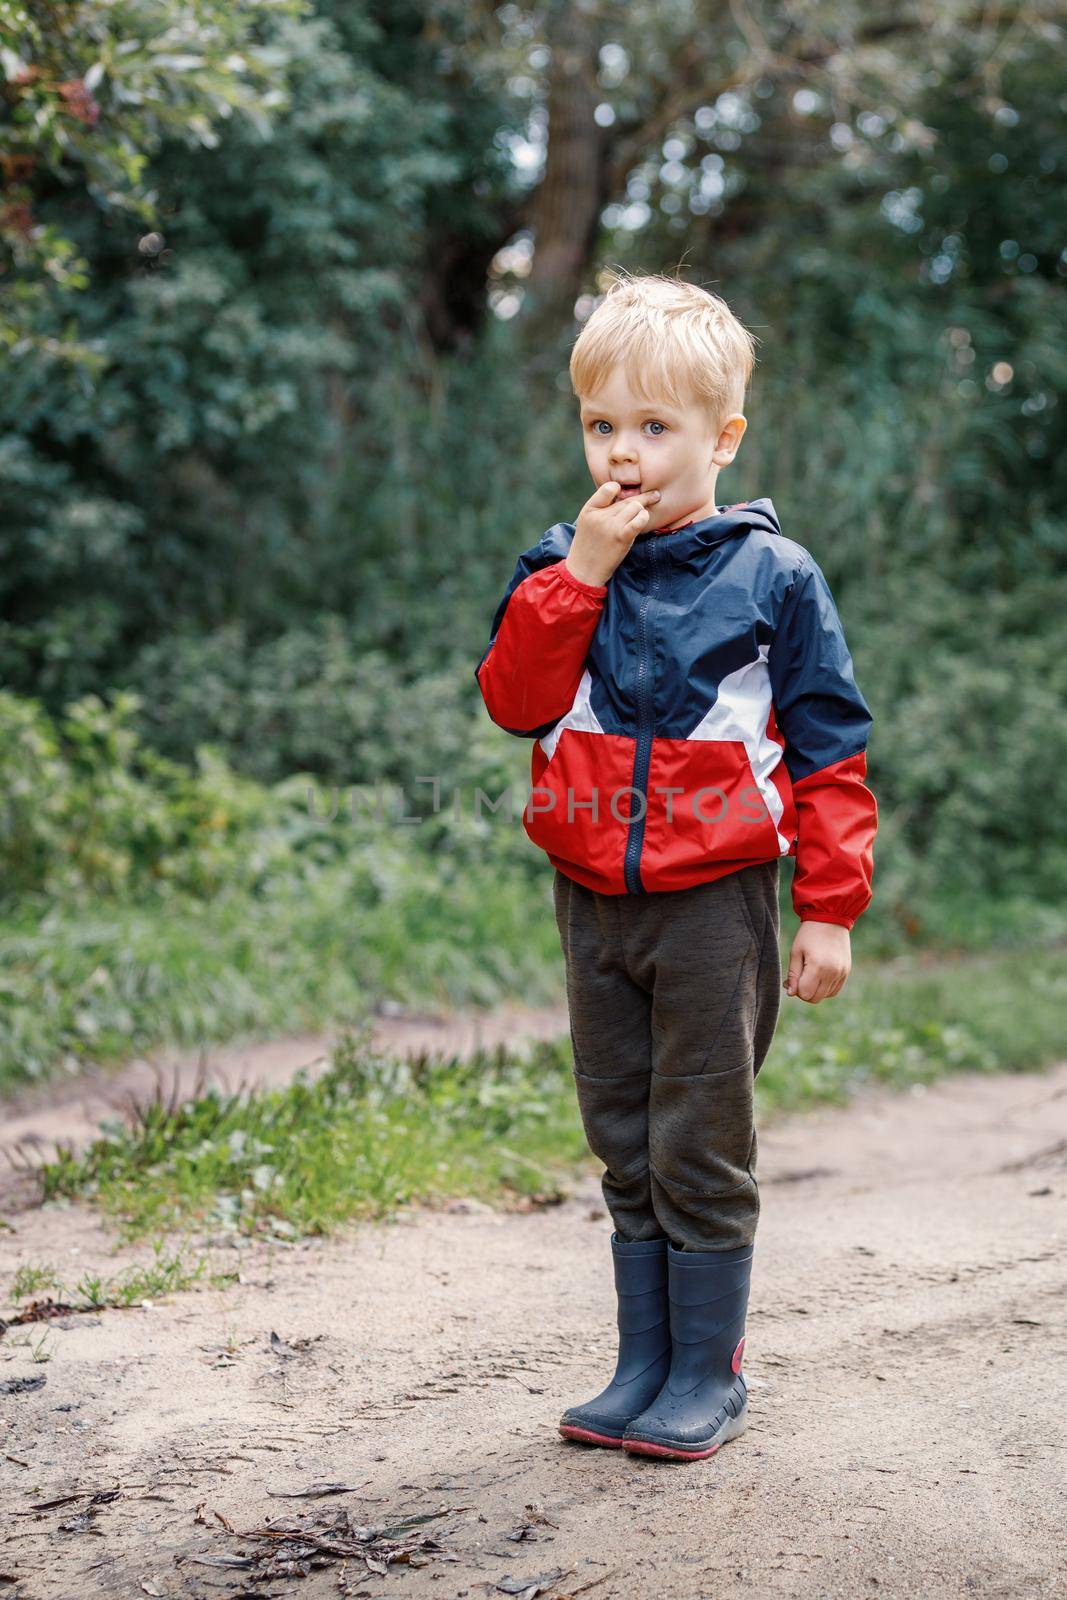 A portrait of a little boy showing a grimace. A child in a colorful jacket, wearing waterproof boots, is standing on the edge of a forest.